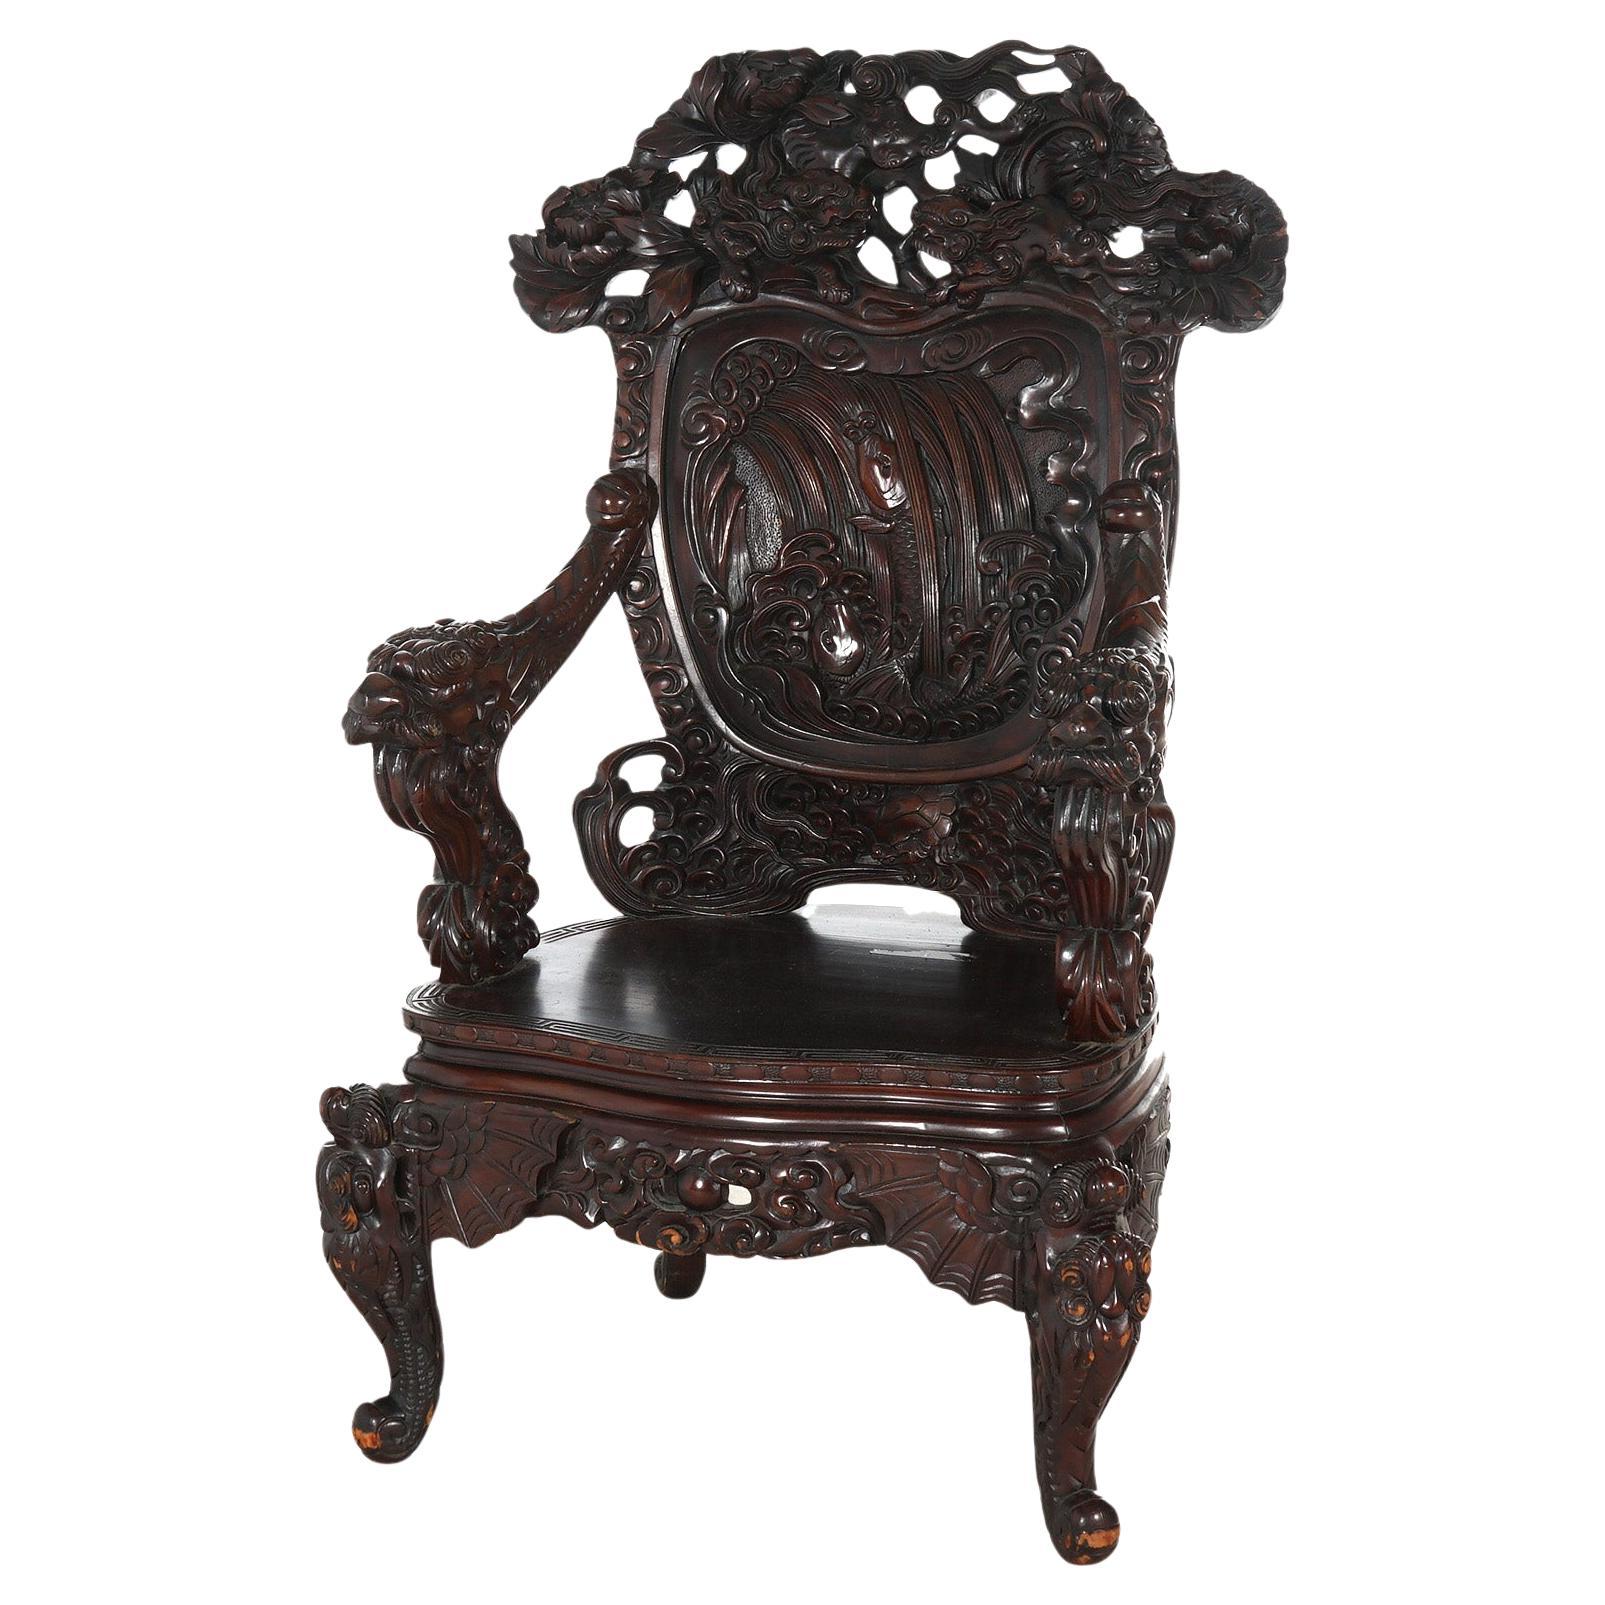 Antique Chinese Deep Carved Rosewood Figural King Throne Chair with Dragons 1920 For Sale